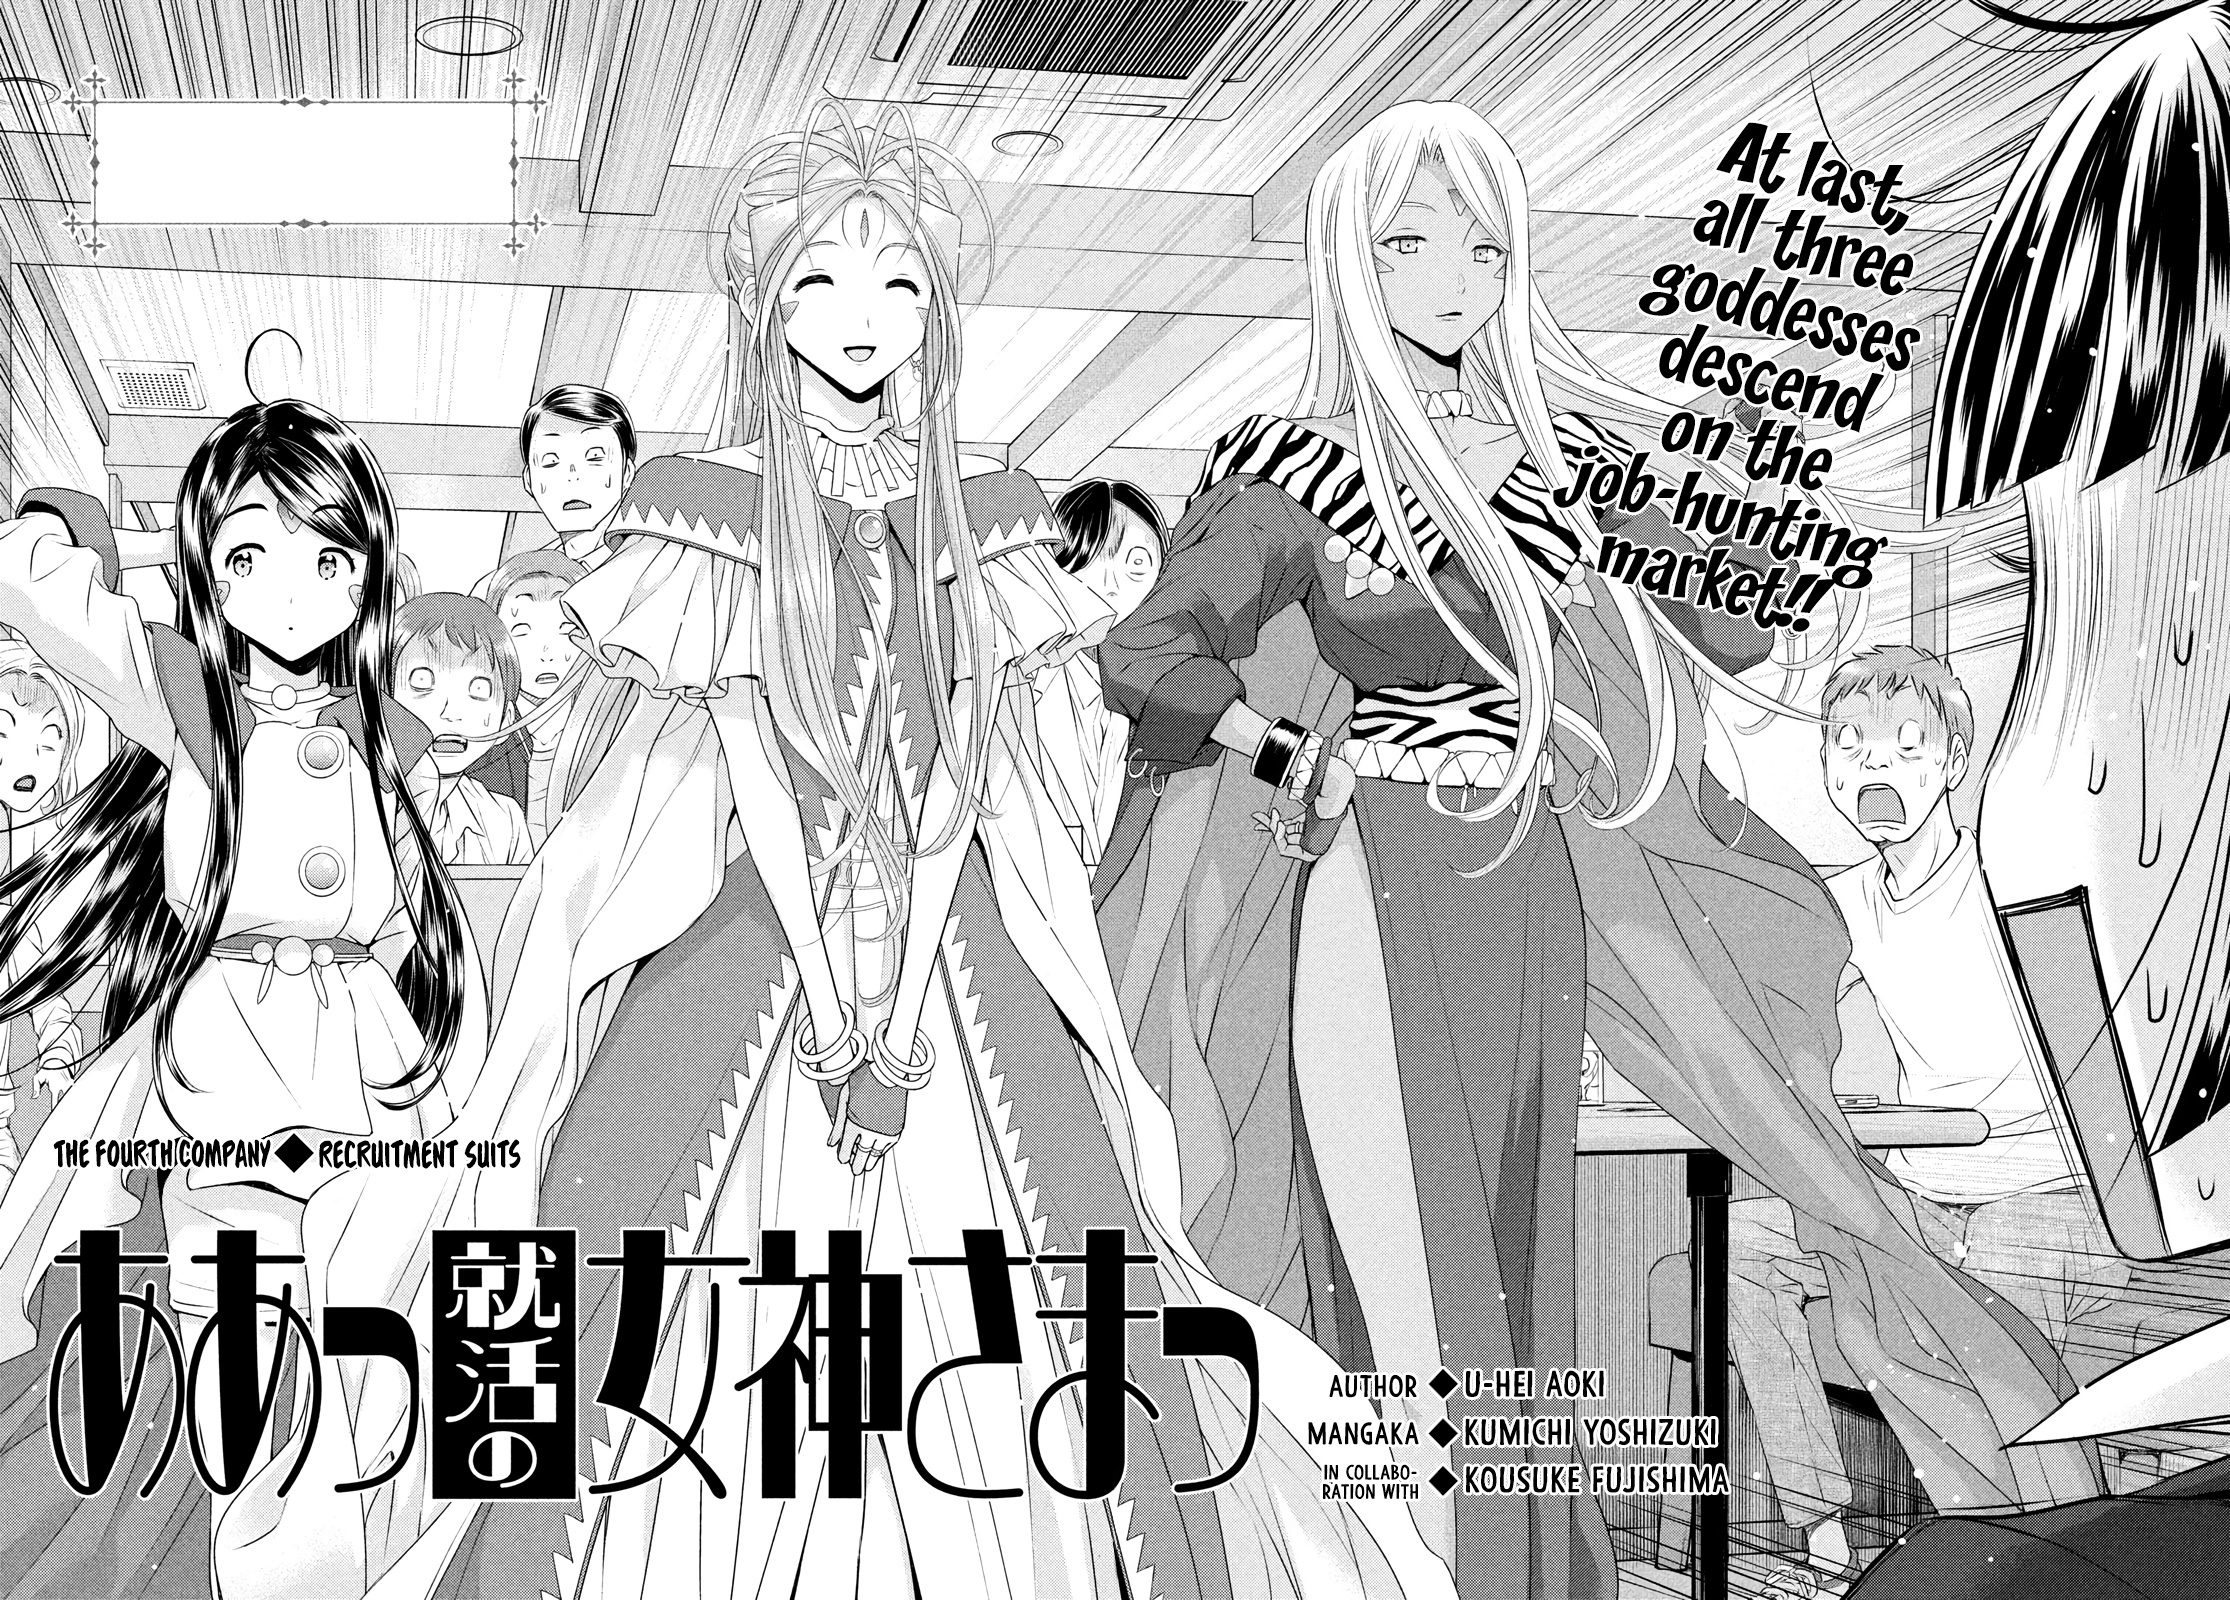 Ah! My Job-Hunting Goddess Vol.1 Chapter 4: The Fourth Company - Recruitment Suits - Picture 3